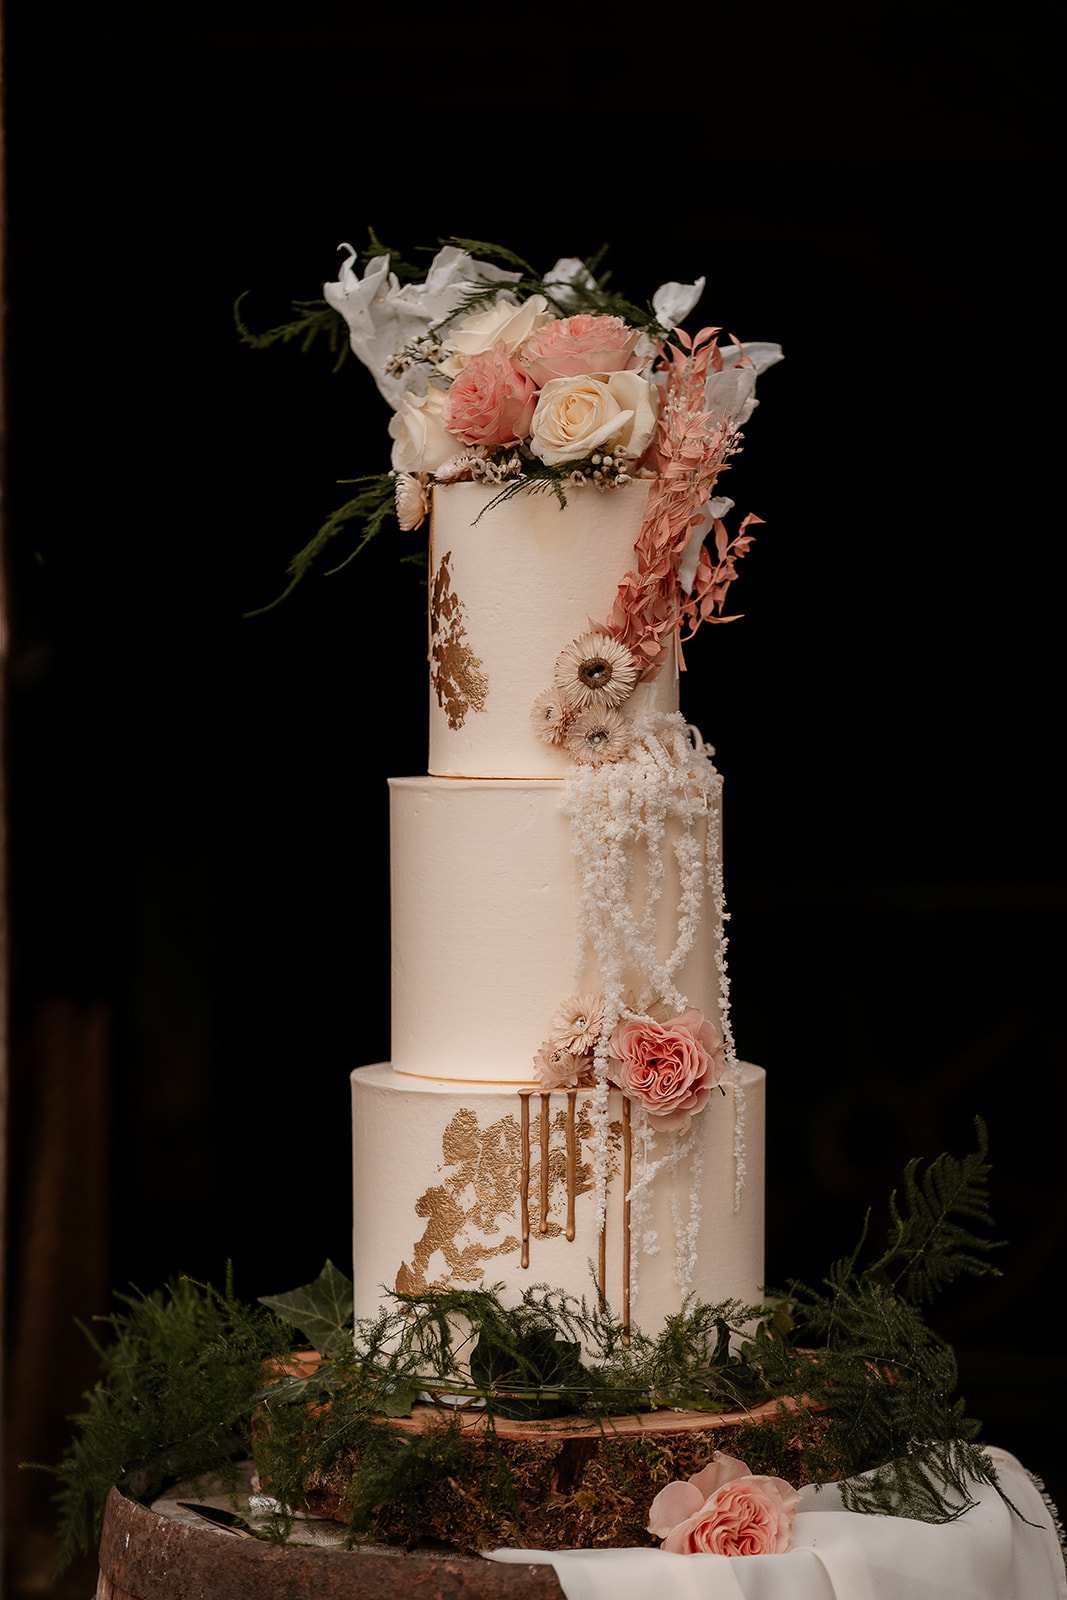 Three tier wedding cake in peachy tones with gold leaf decoration and floral topper